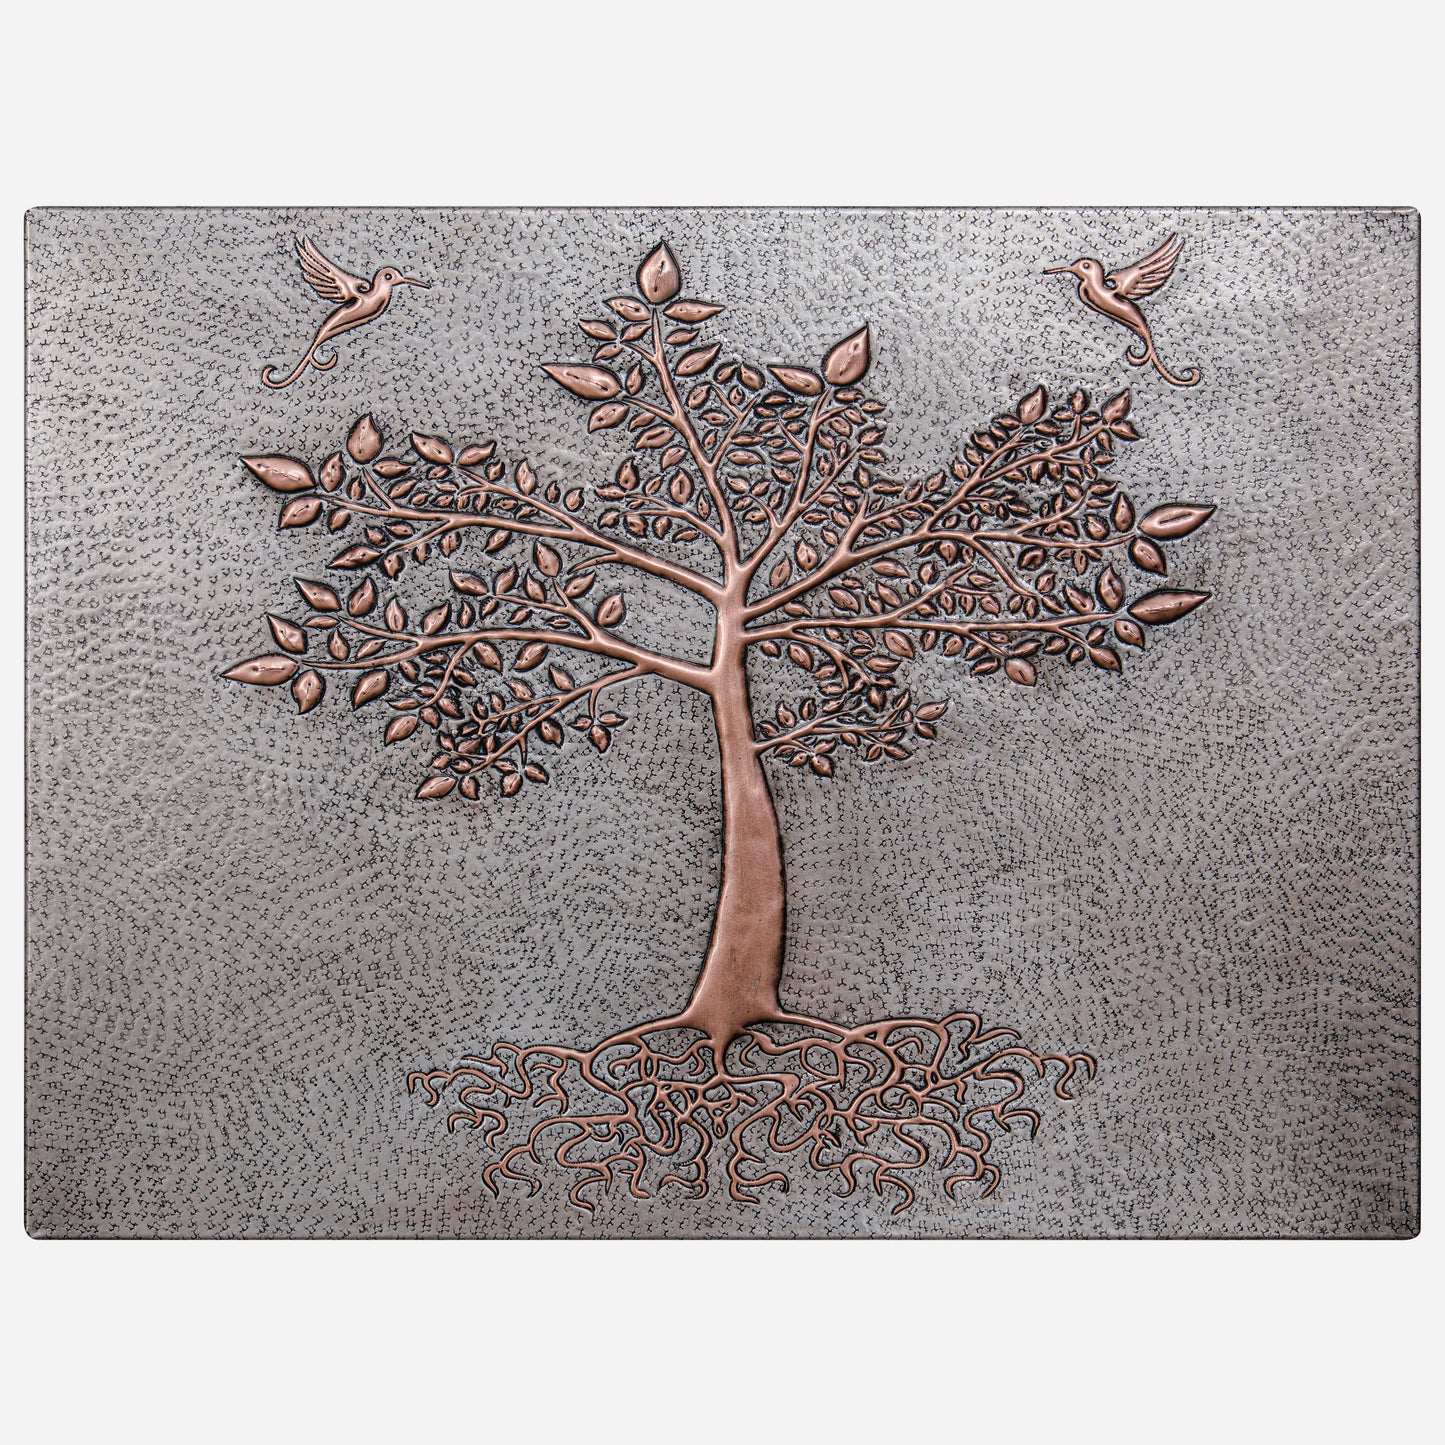 Copper Backsplash Panel (Tree with Roots, Hummingbirds, Silver&Copper Color)